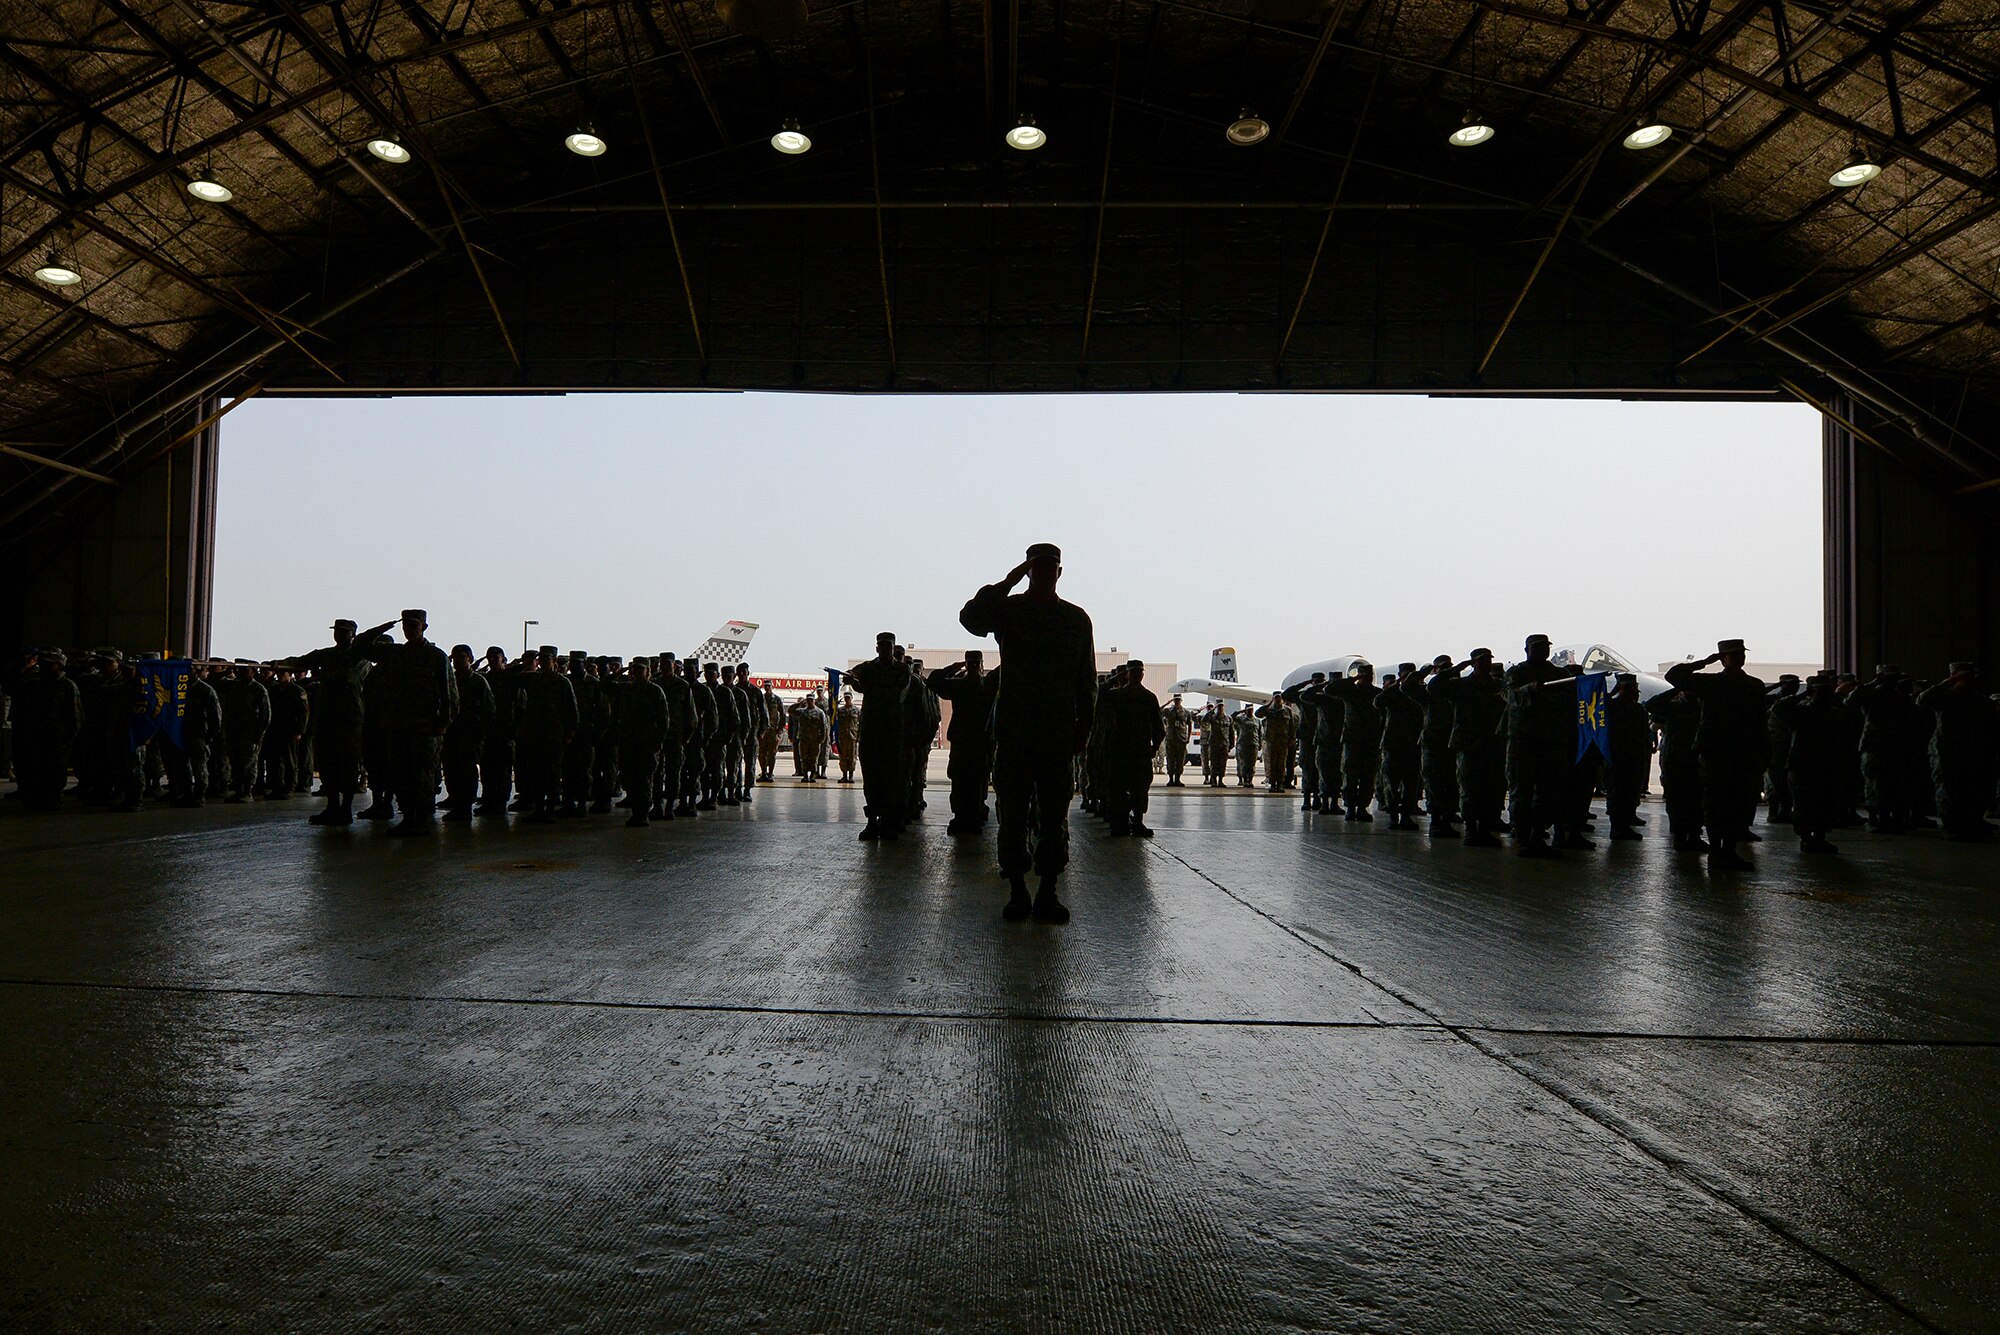 The 51st Fighter Wing stands in formation at the 51st FW change of command ceremony June 16, 2015, at Osan Air Base, Republic of Korea. The event signified the transfer of authority in the 66-year-old fighter wing. (U.S. Air Force photo by Staff Sgt. Jake Barreiro/Released)